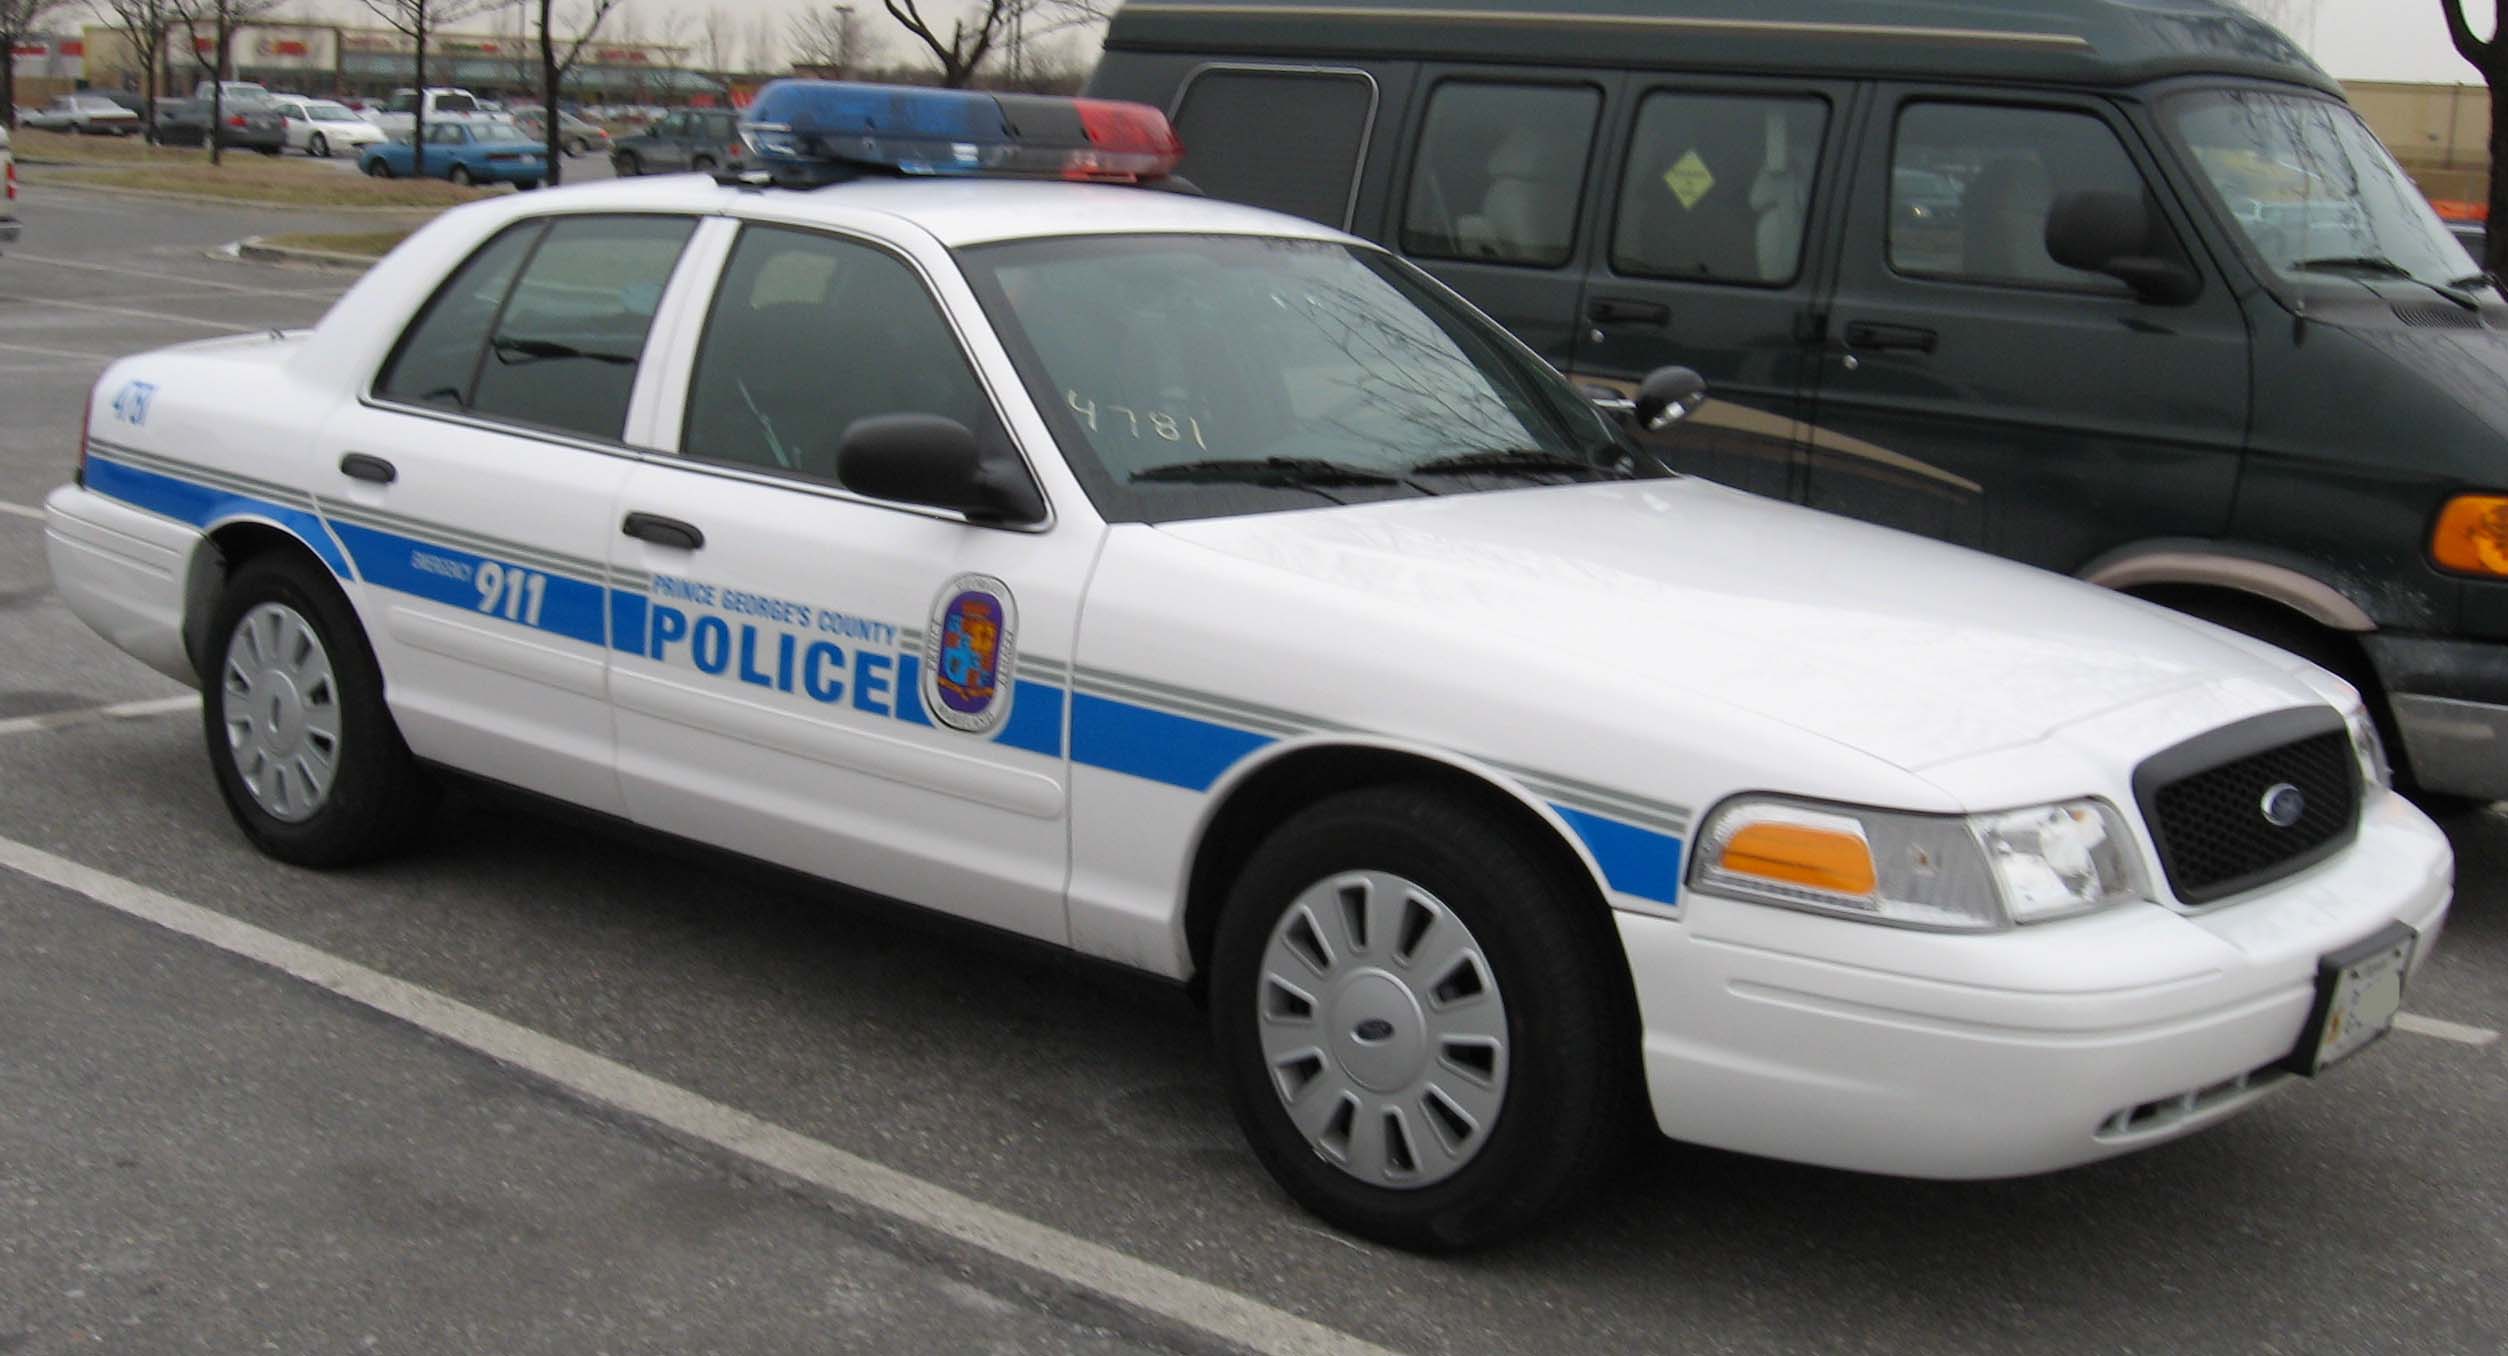 FORD CROWN POLICE